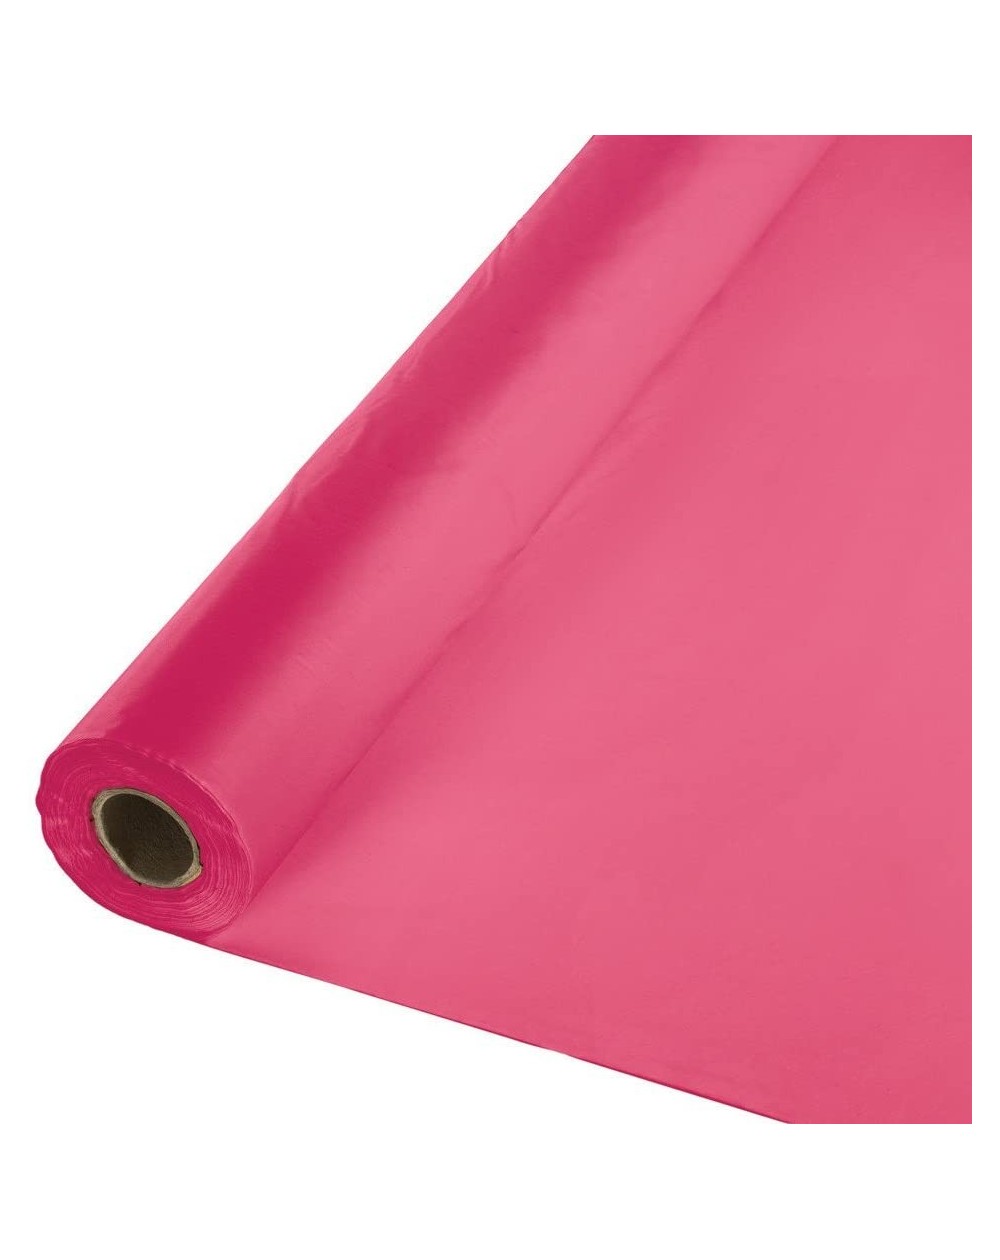 Tablecovers Roll Plastic Table Cover- 100-Feet- Hot Magenta - Hot Magenta - CL112HROW5P $21.71